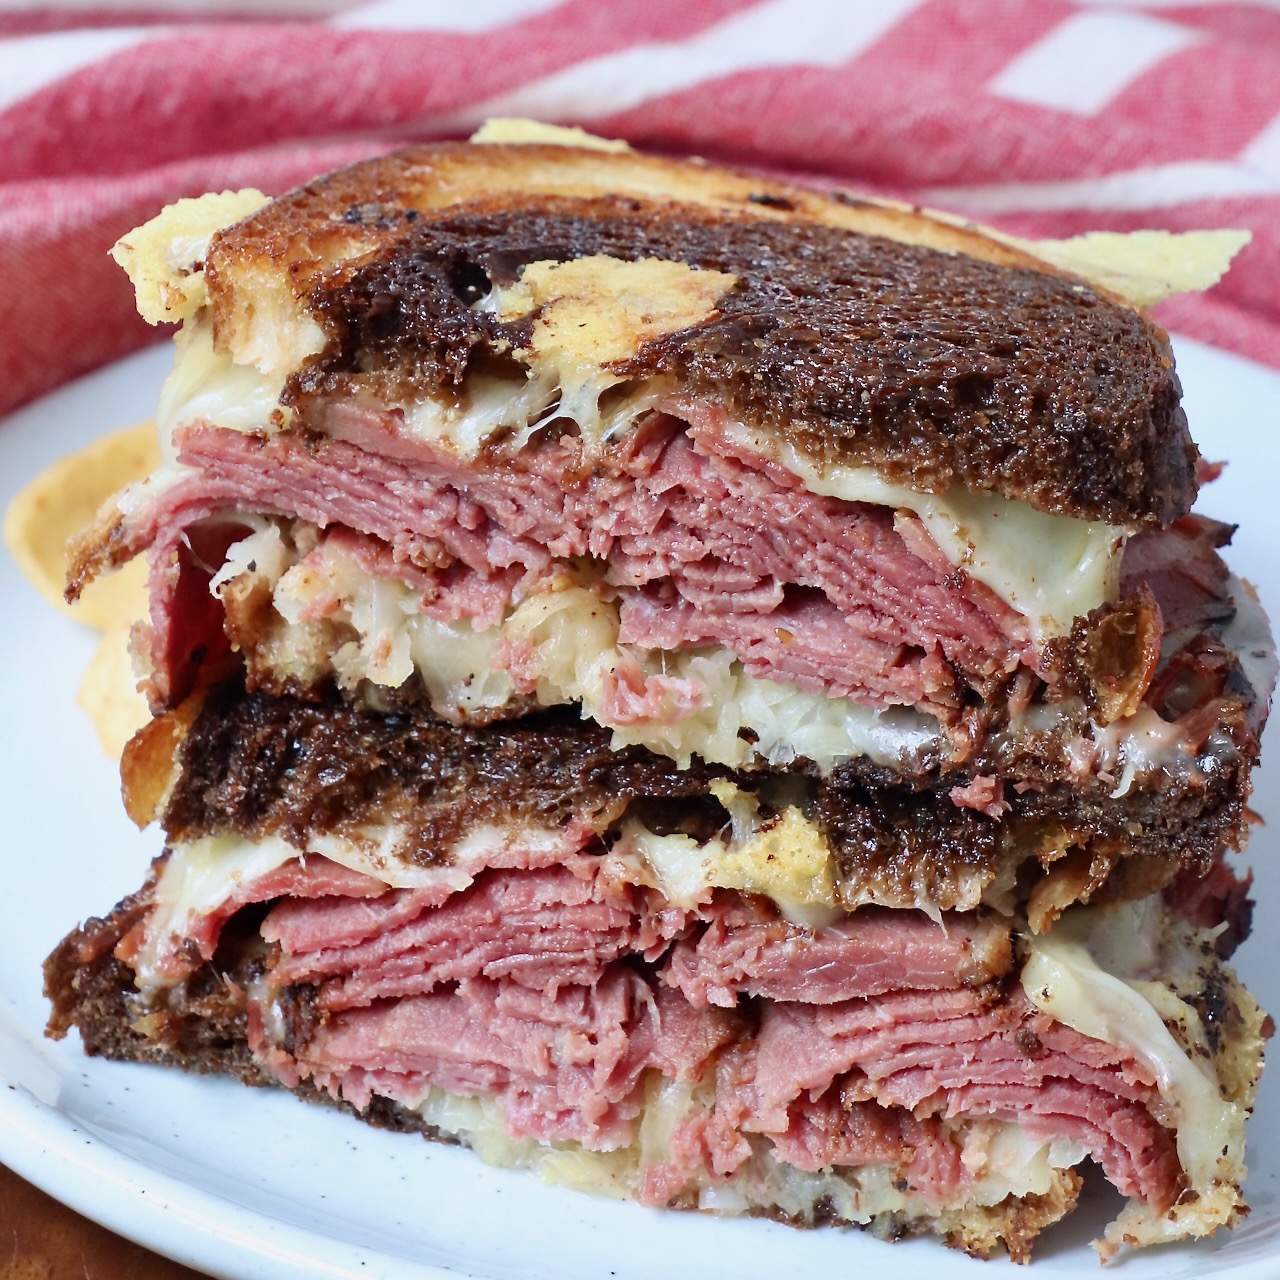 pastrami reuben sandwich cut in half and stacked up on plate